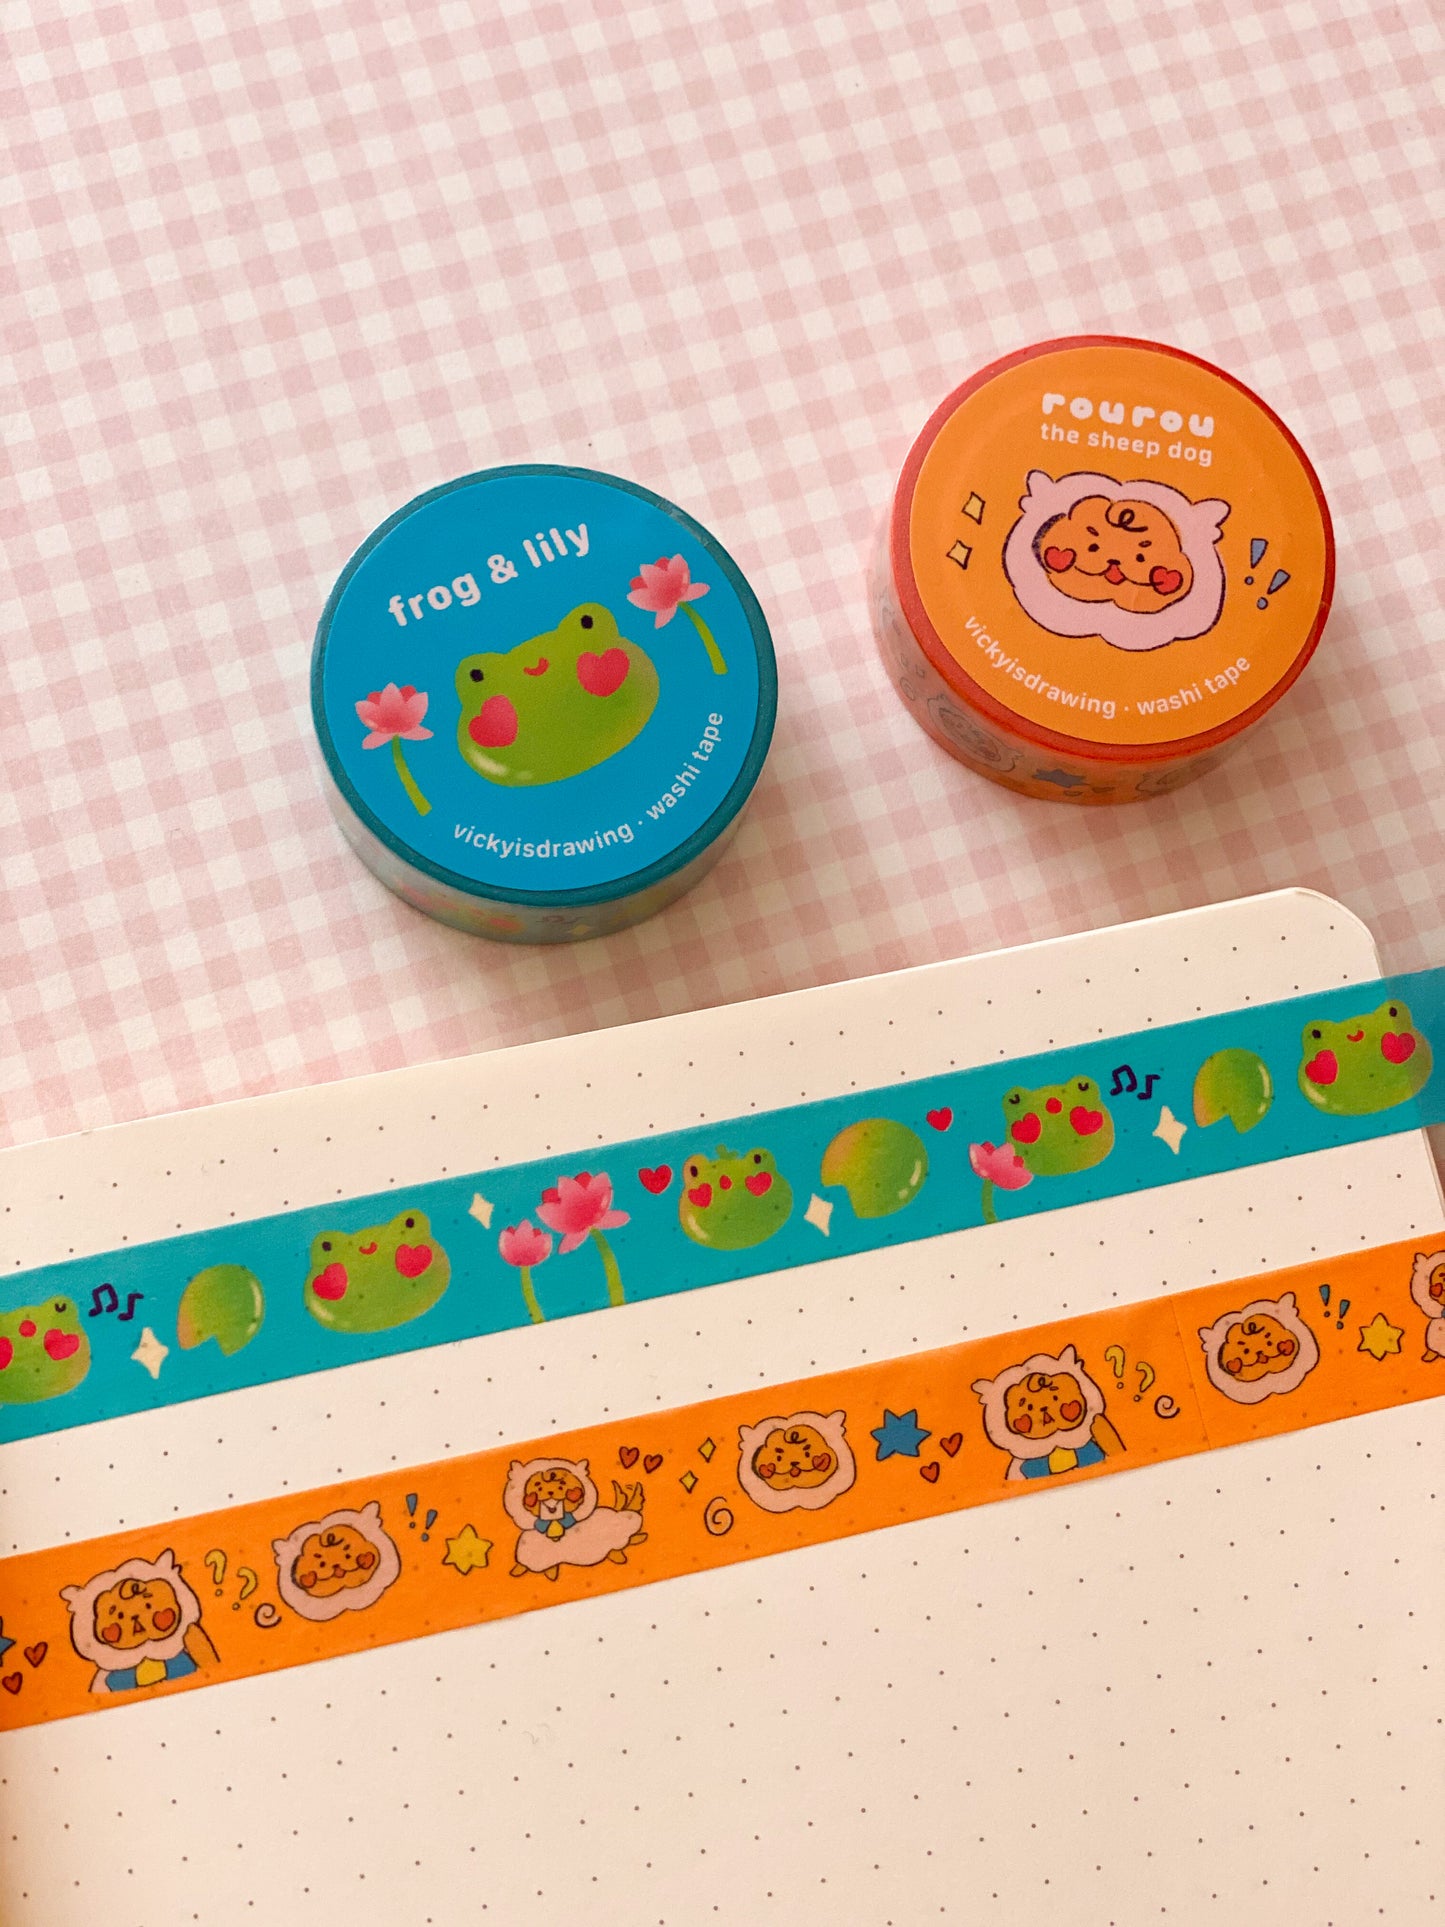 Frog & Lily Washi Tape